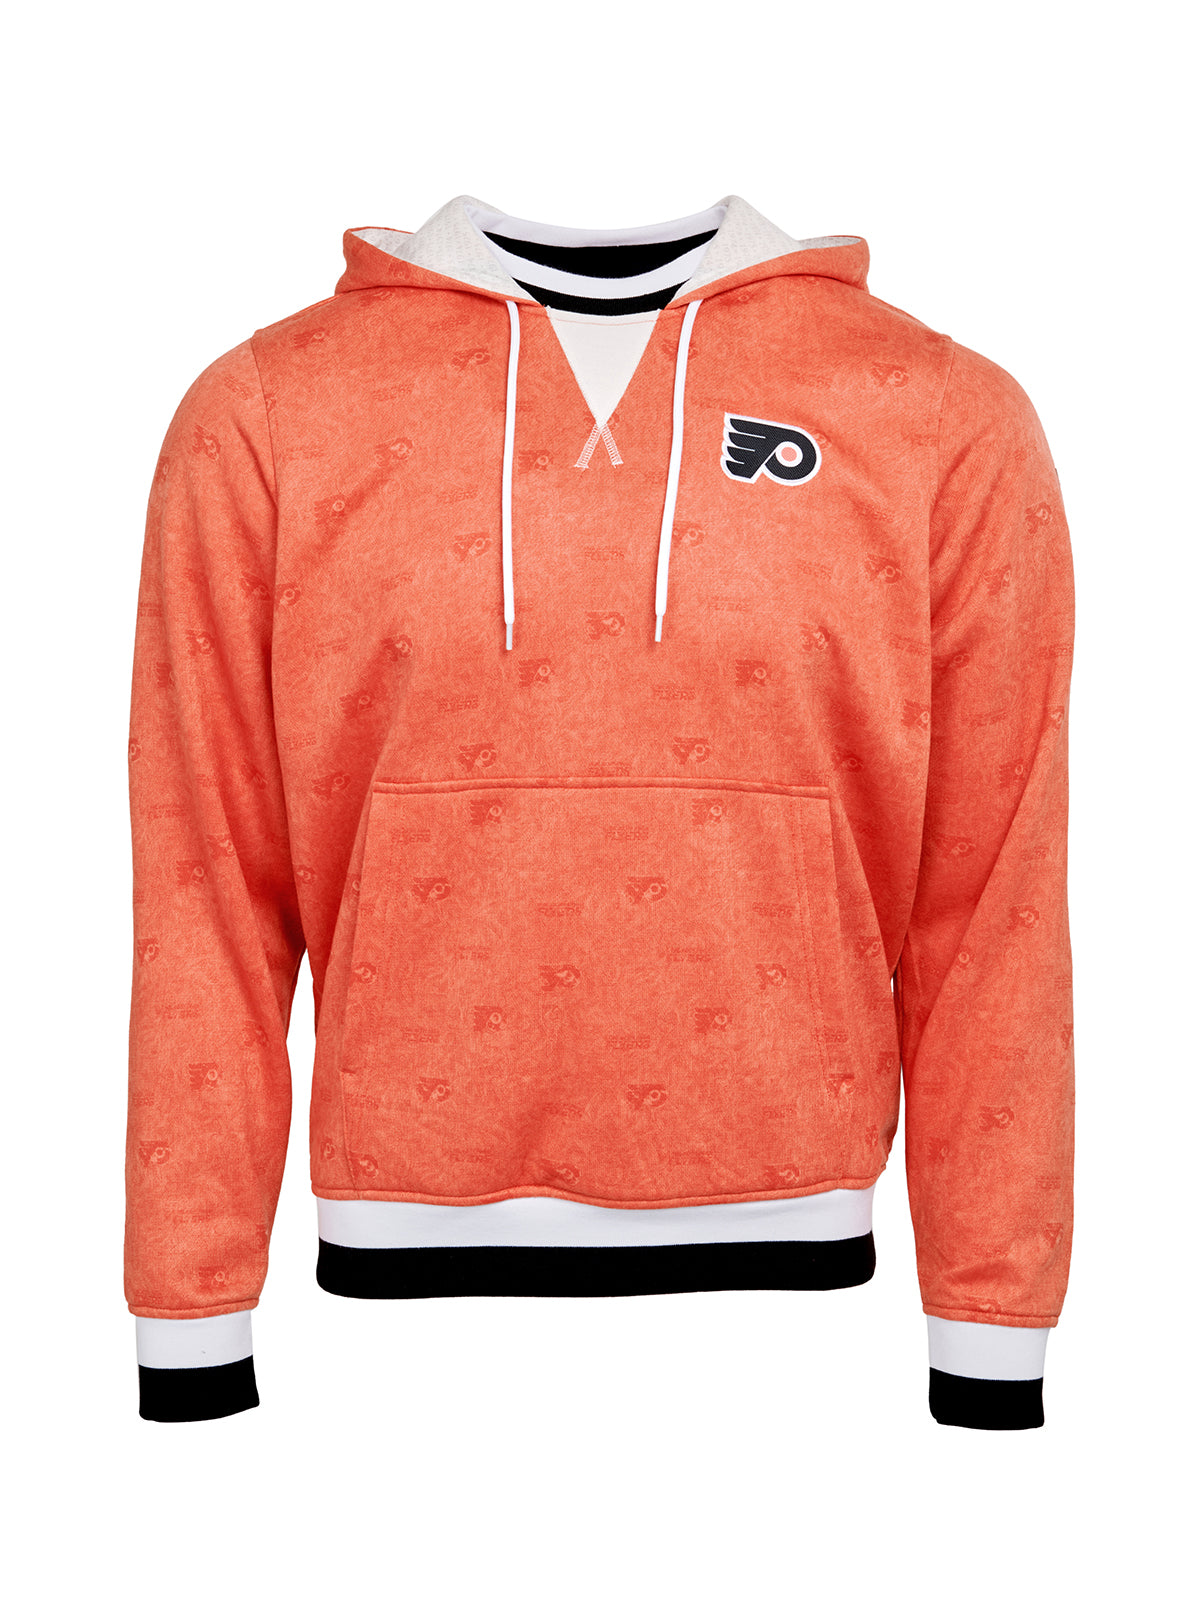 Philadelphia Flyers Hoodie - Show your team spirit, with the iconic team logo patch on the front left chest, and proudly display your Philadelphia Flyers support in their team colors with this NHL hockey hoodie.